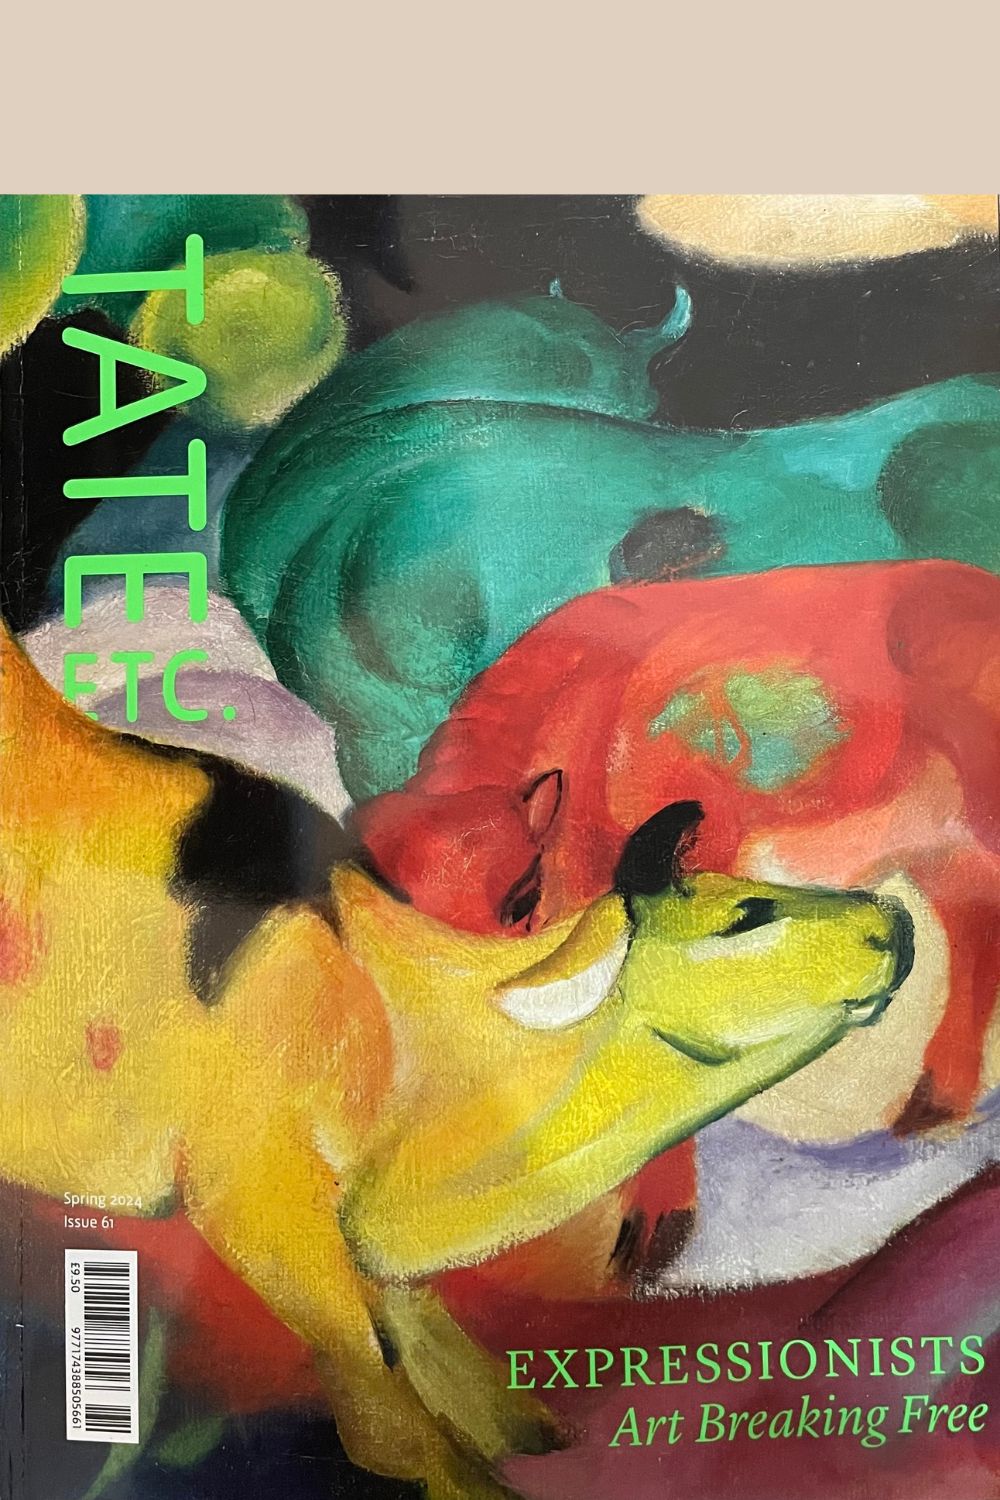 Tate Etc. Issue 61 cover (Franz Marc painting background)